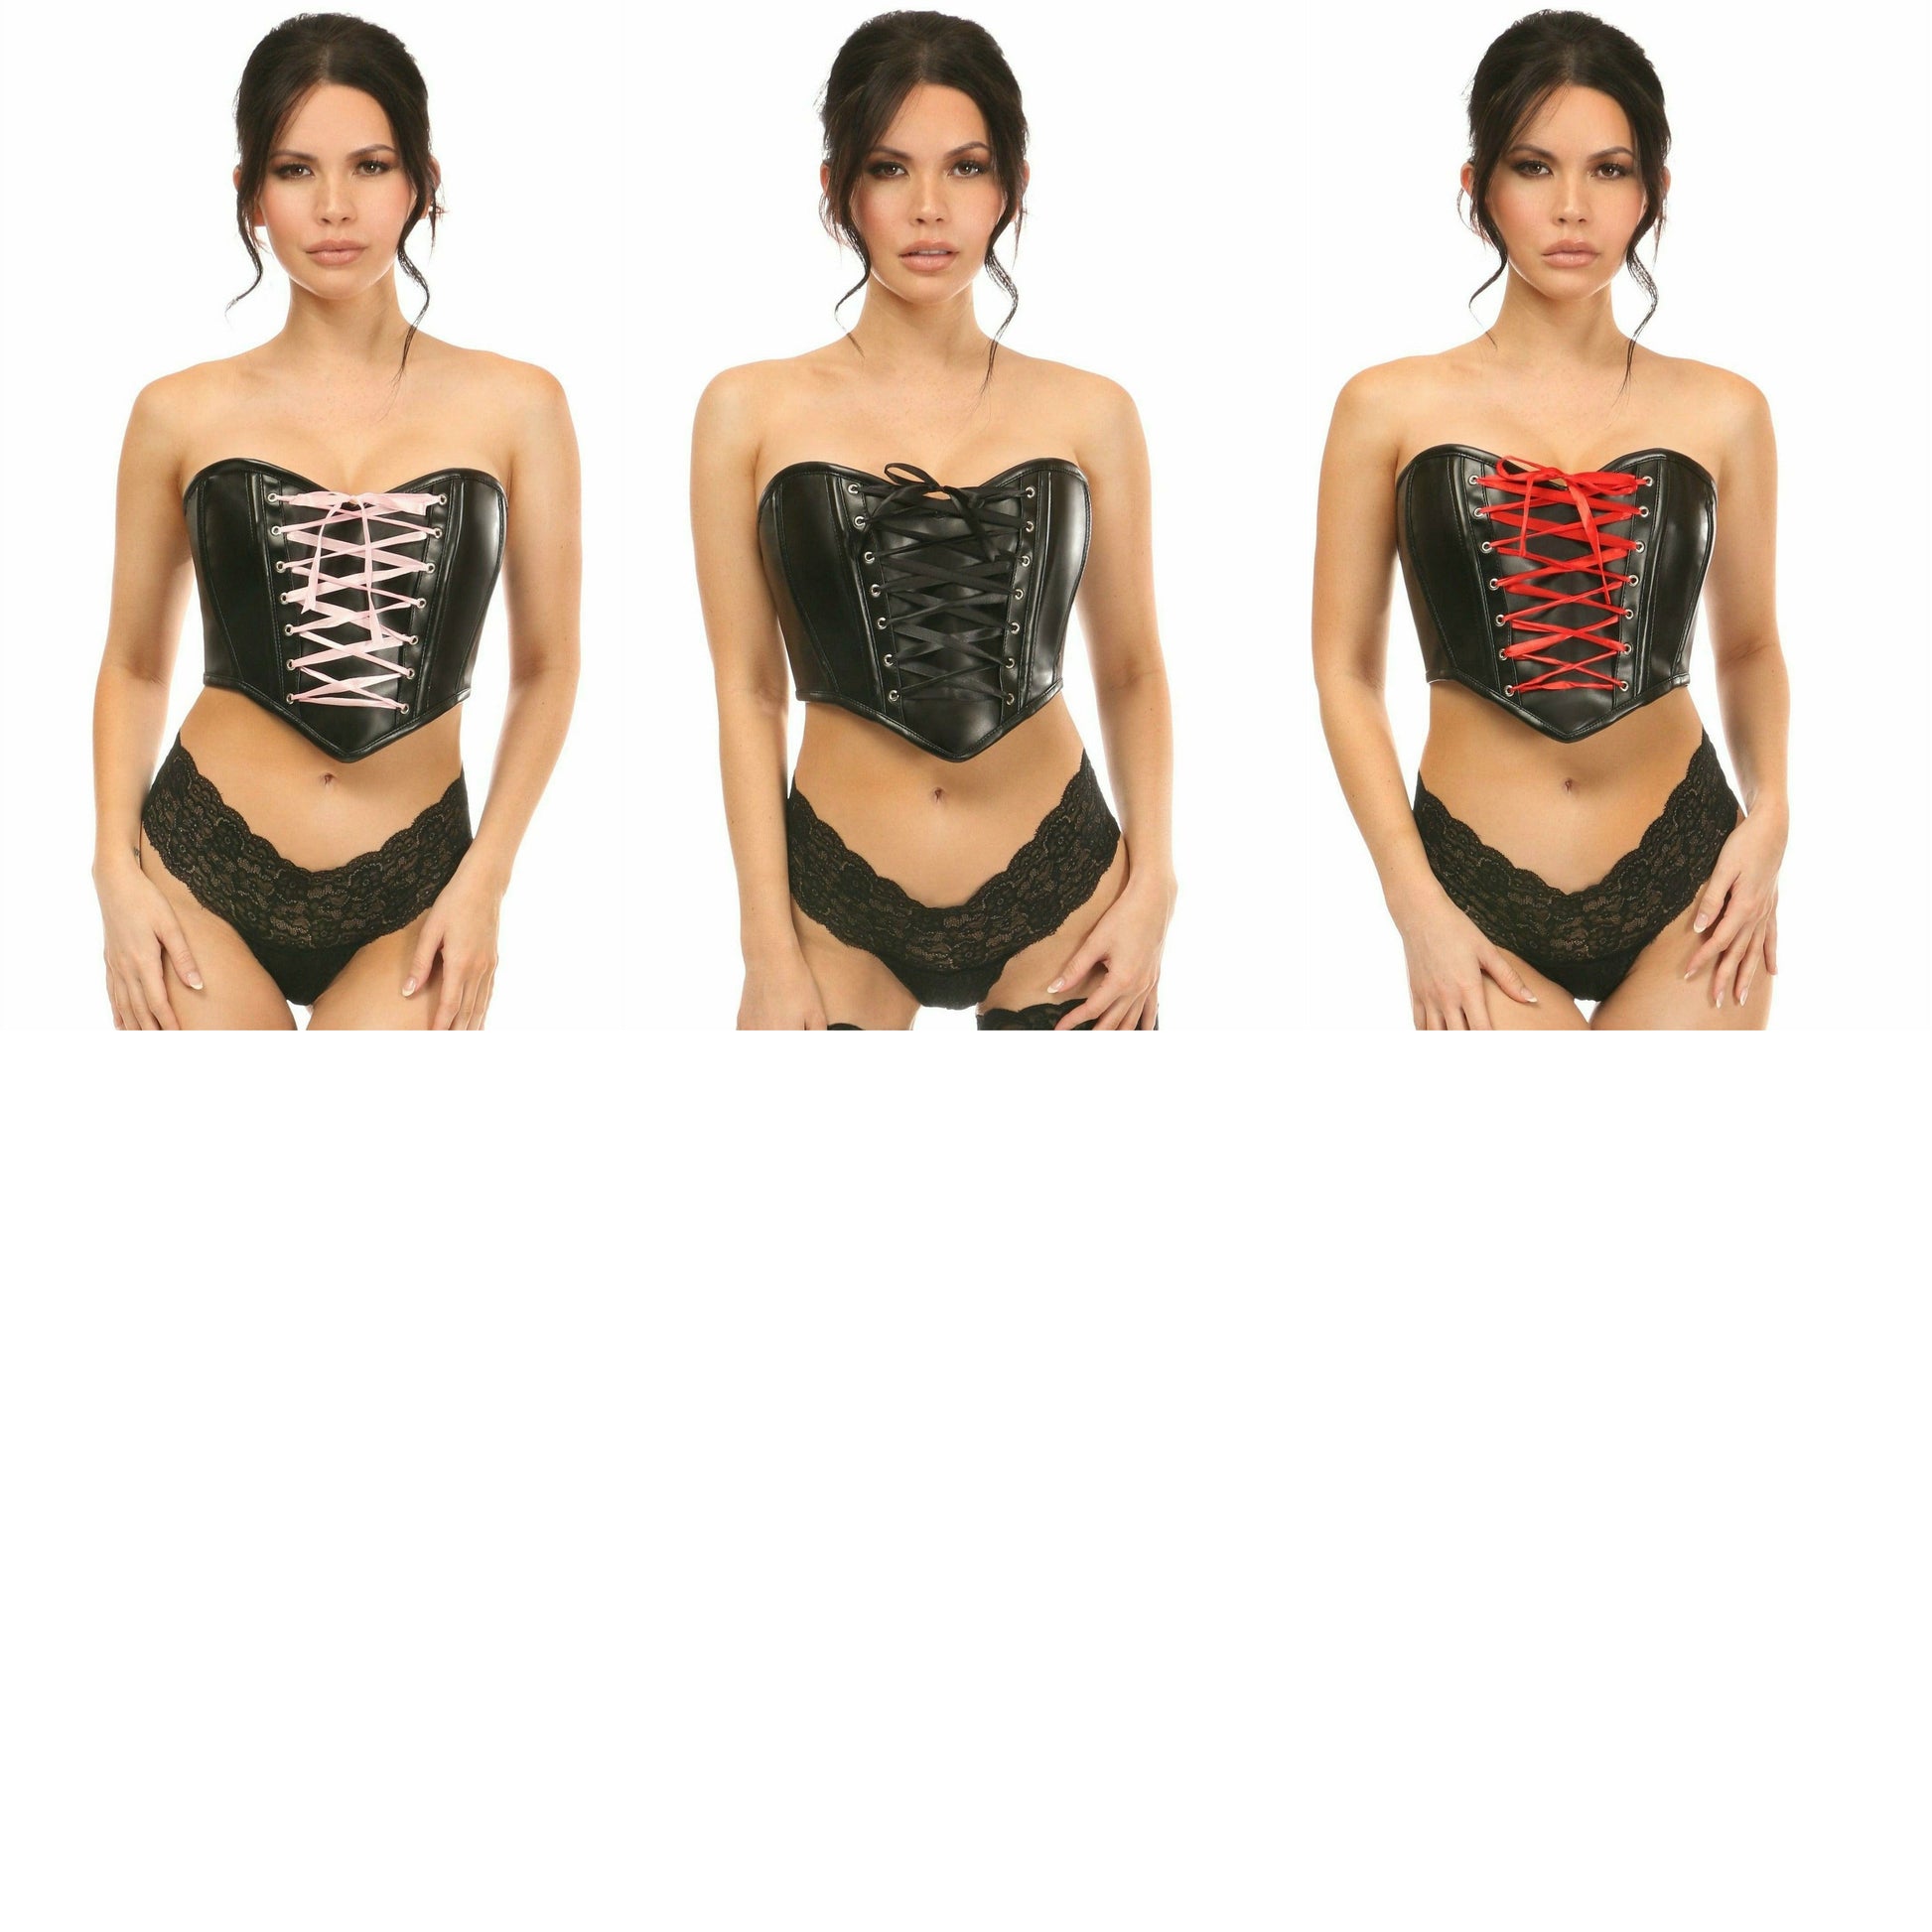 Faux Leather Lace Up Bustier by Daisy Corsets in 3 Color Choices in Size S, M, L, XL, 2X, 3X, 4X, 5X, or 6X